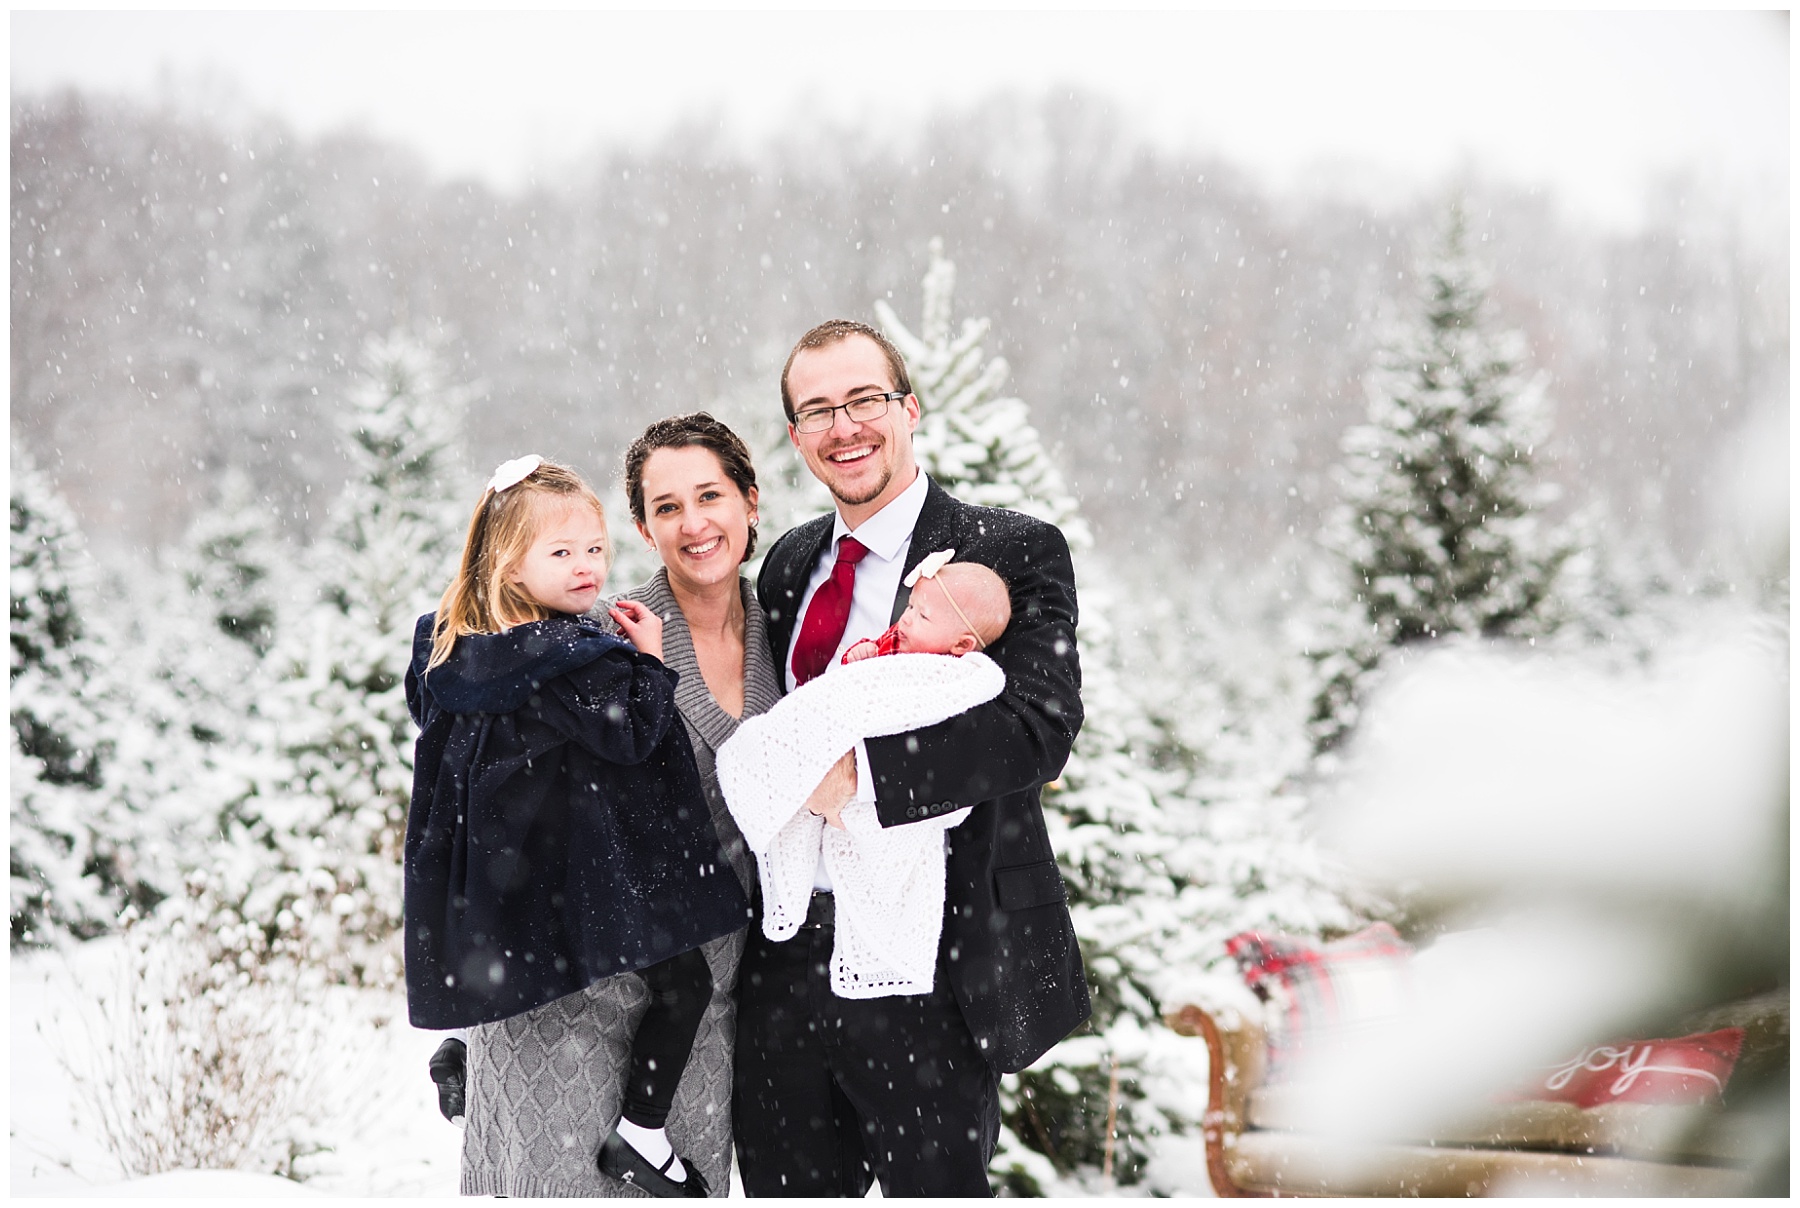 Merry Christmas from the Ludlows, Samantha Ludlow Photography, Syracuse photographer, Syracuse wedding photographer, Rochester wedding photographer